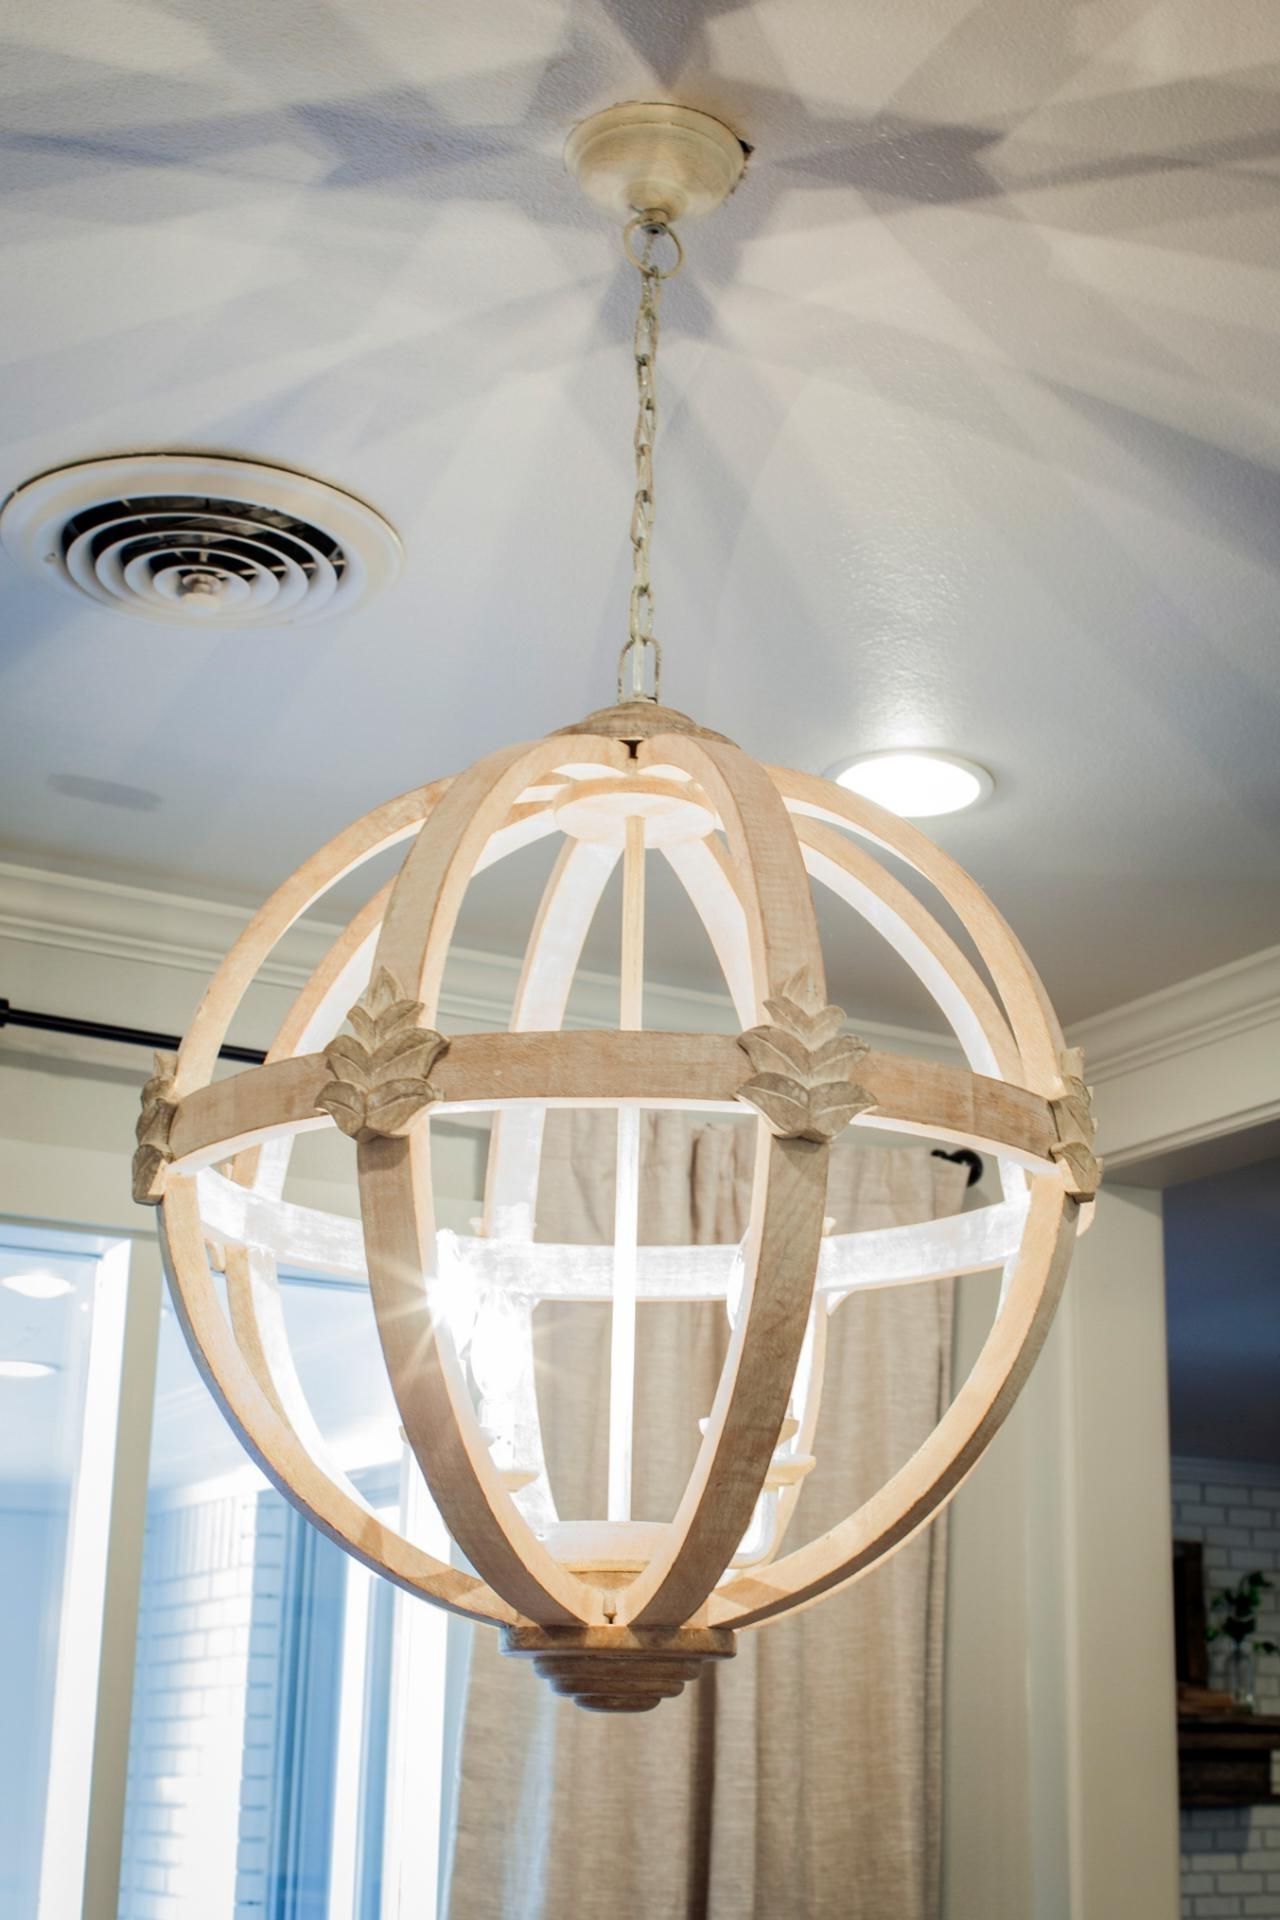 French Wooden Chandelier Regarding Newest 11 Ways To Get The Fixer Upper Look In Your Home – Page 4 Of  (View 7 of 15)